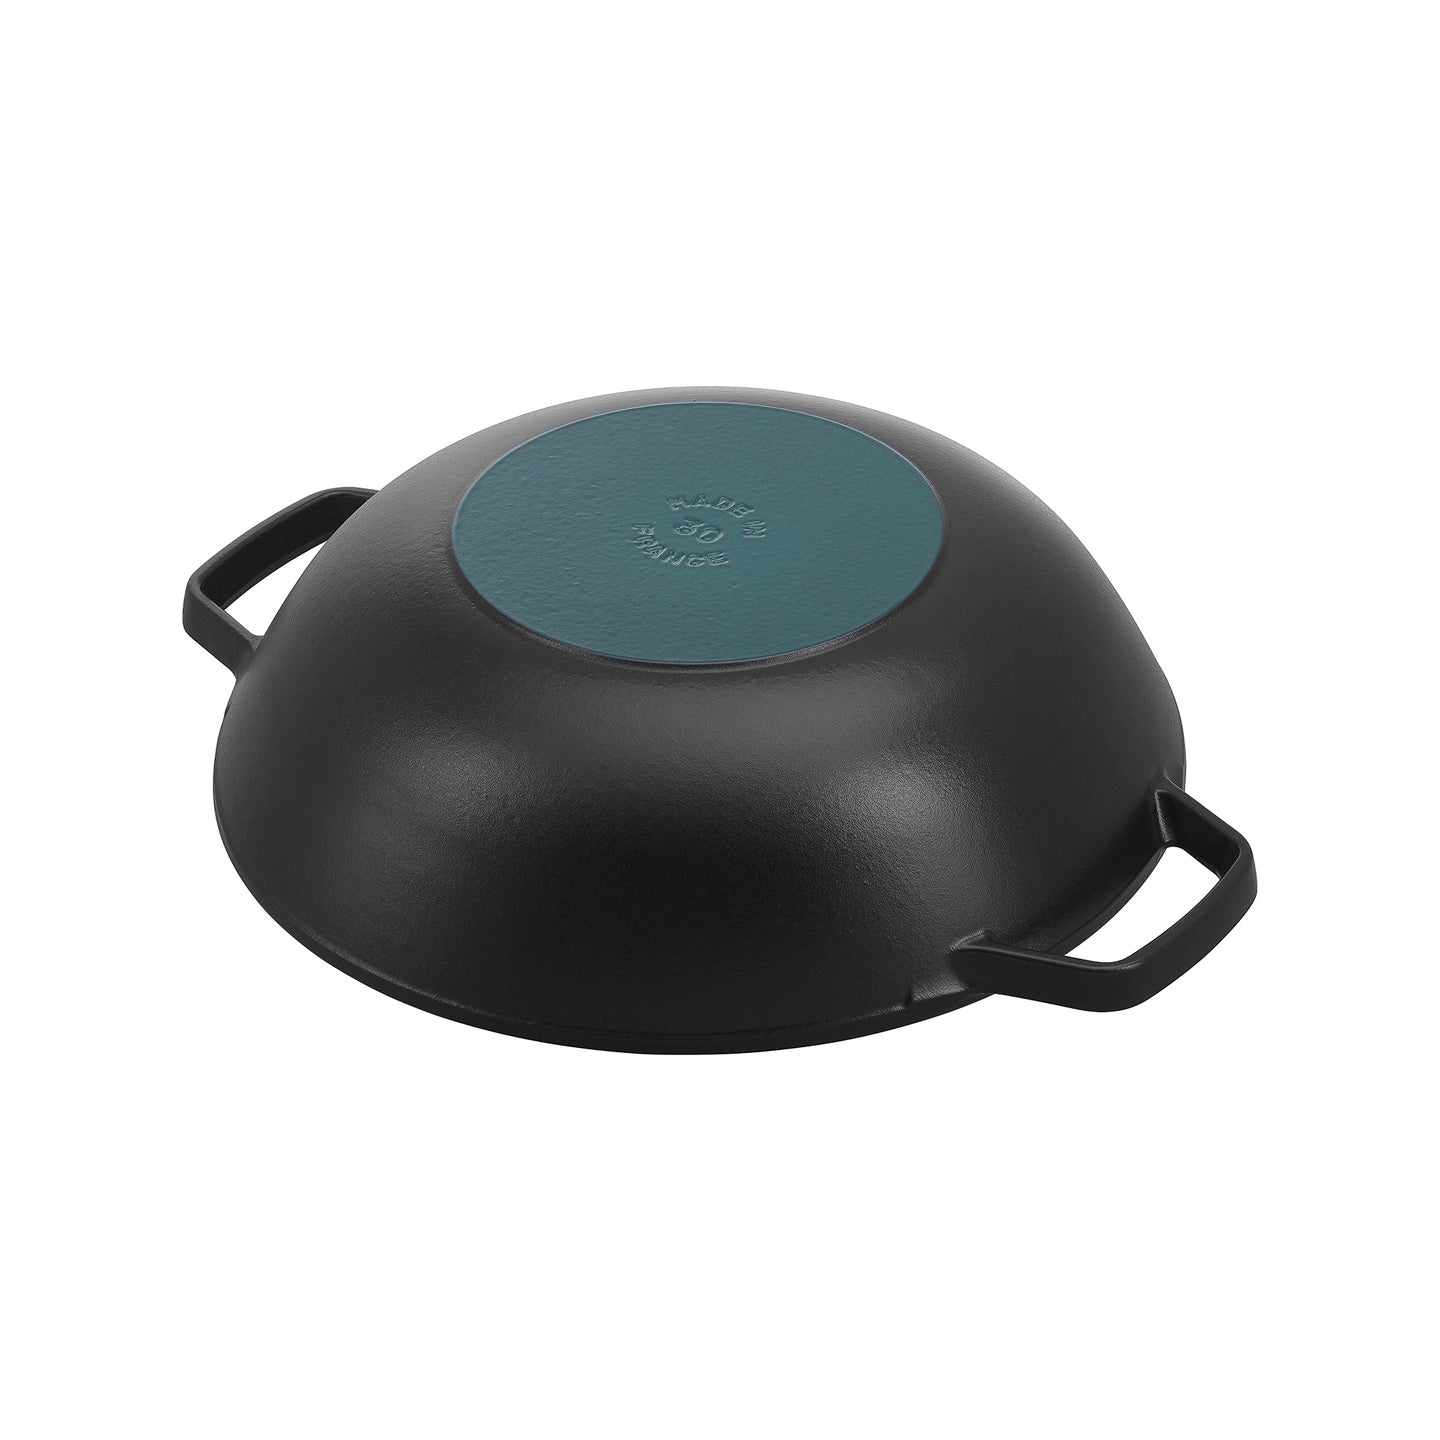 Staub - Wok cm enameled cast iron. 30 with cover - Induction